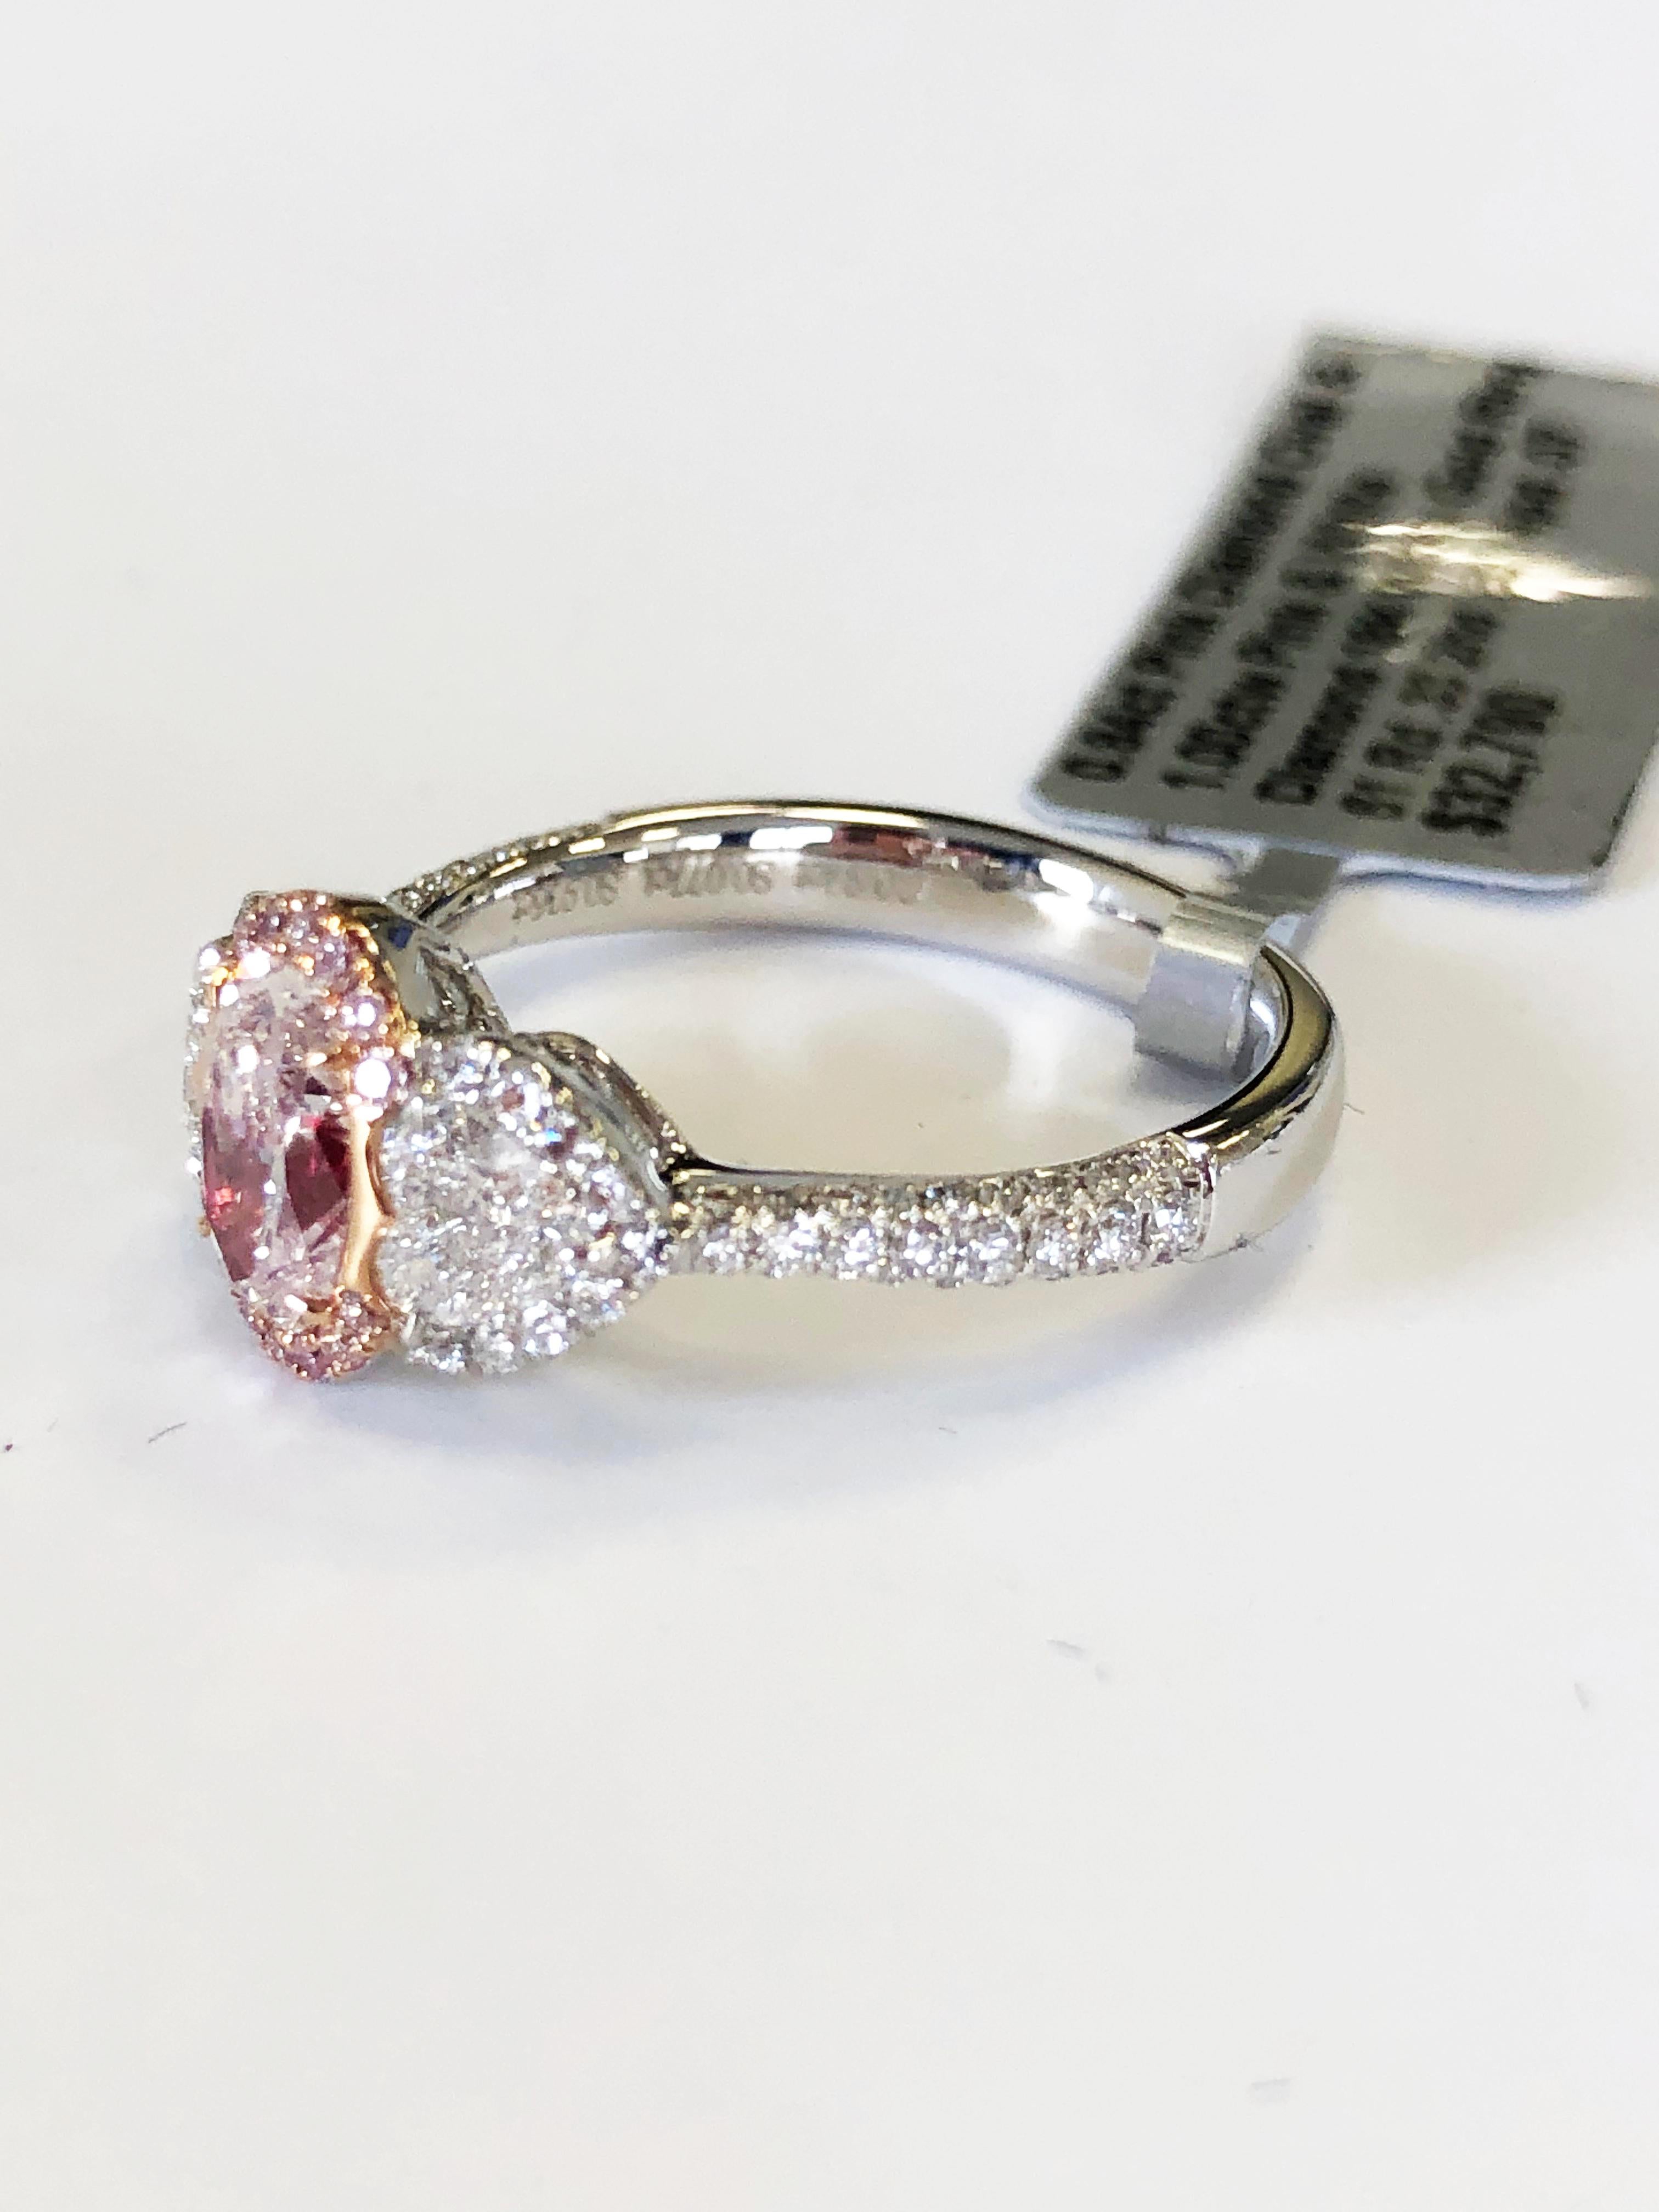 Gorgeous natural pink and white diamond cocktail ring. This ring features a perfectly rose pink oval diamond that weighs 0.84 carats with 1.00 carats of pink and white diamond accent stones. Handcrafted in 18k white gold, this ring is a stunner!